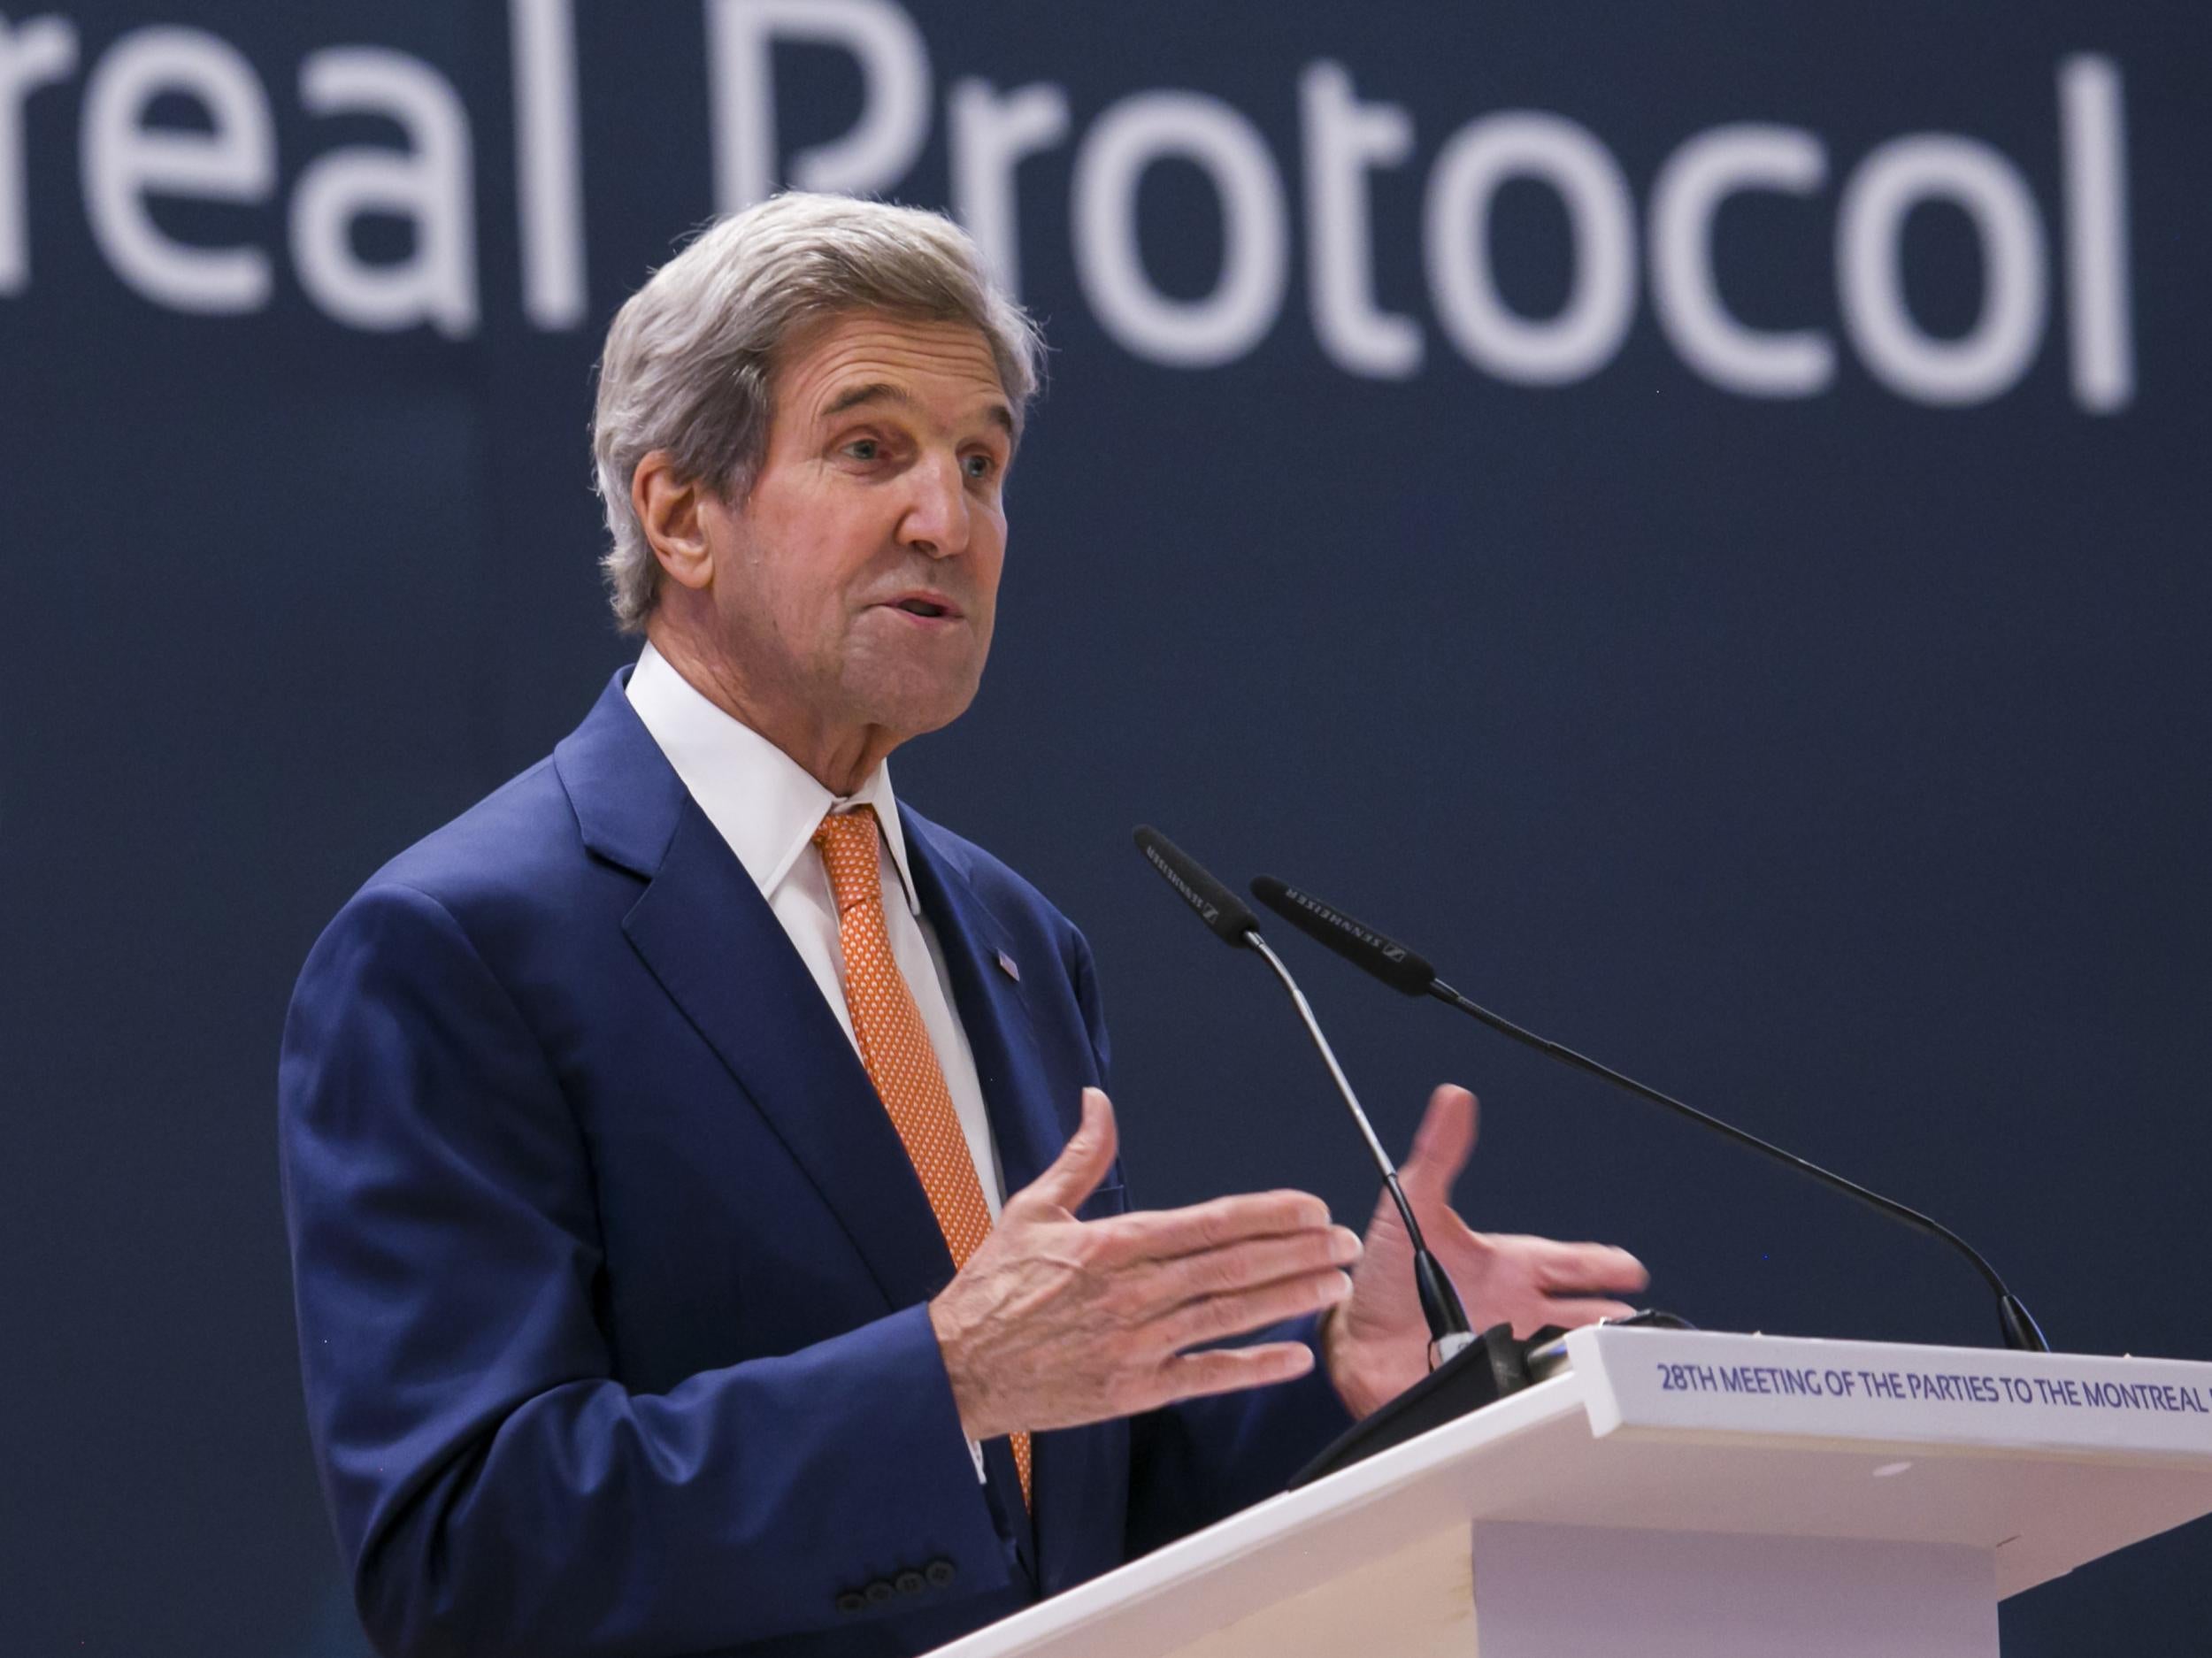 US Secretary of State John Kerry delivers a keynote address at the meeting promoting US climate and environmental goals